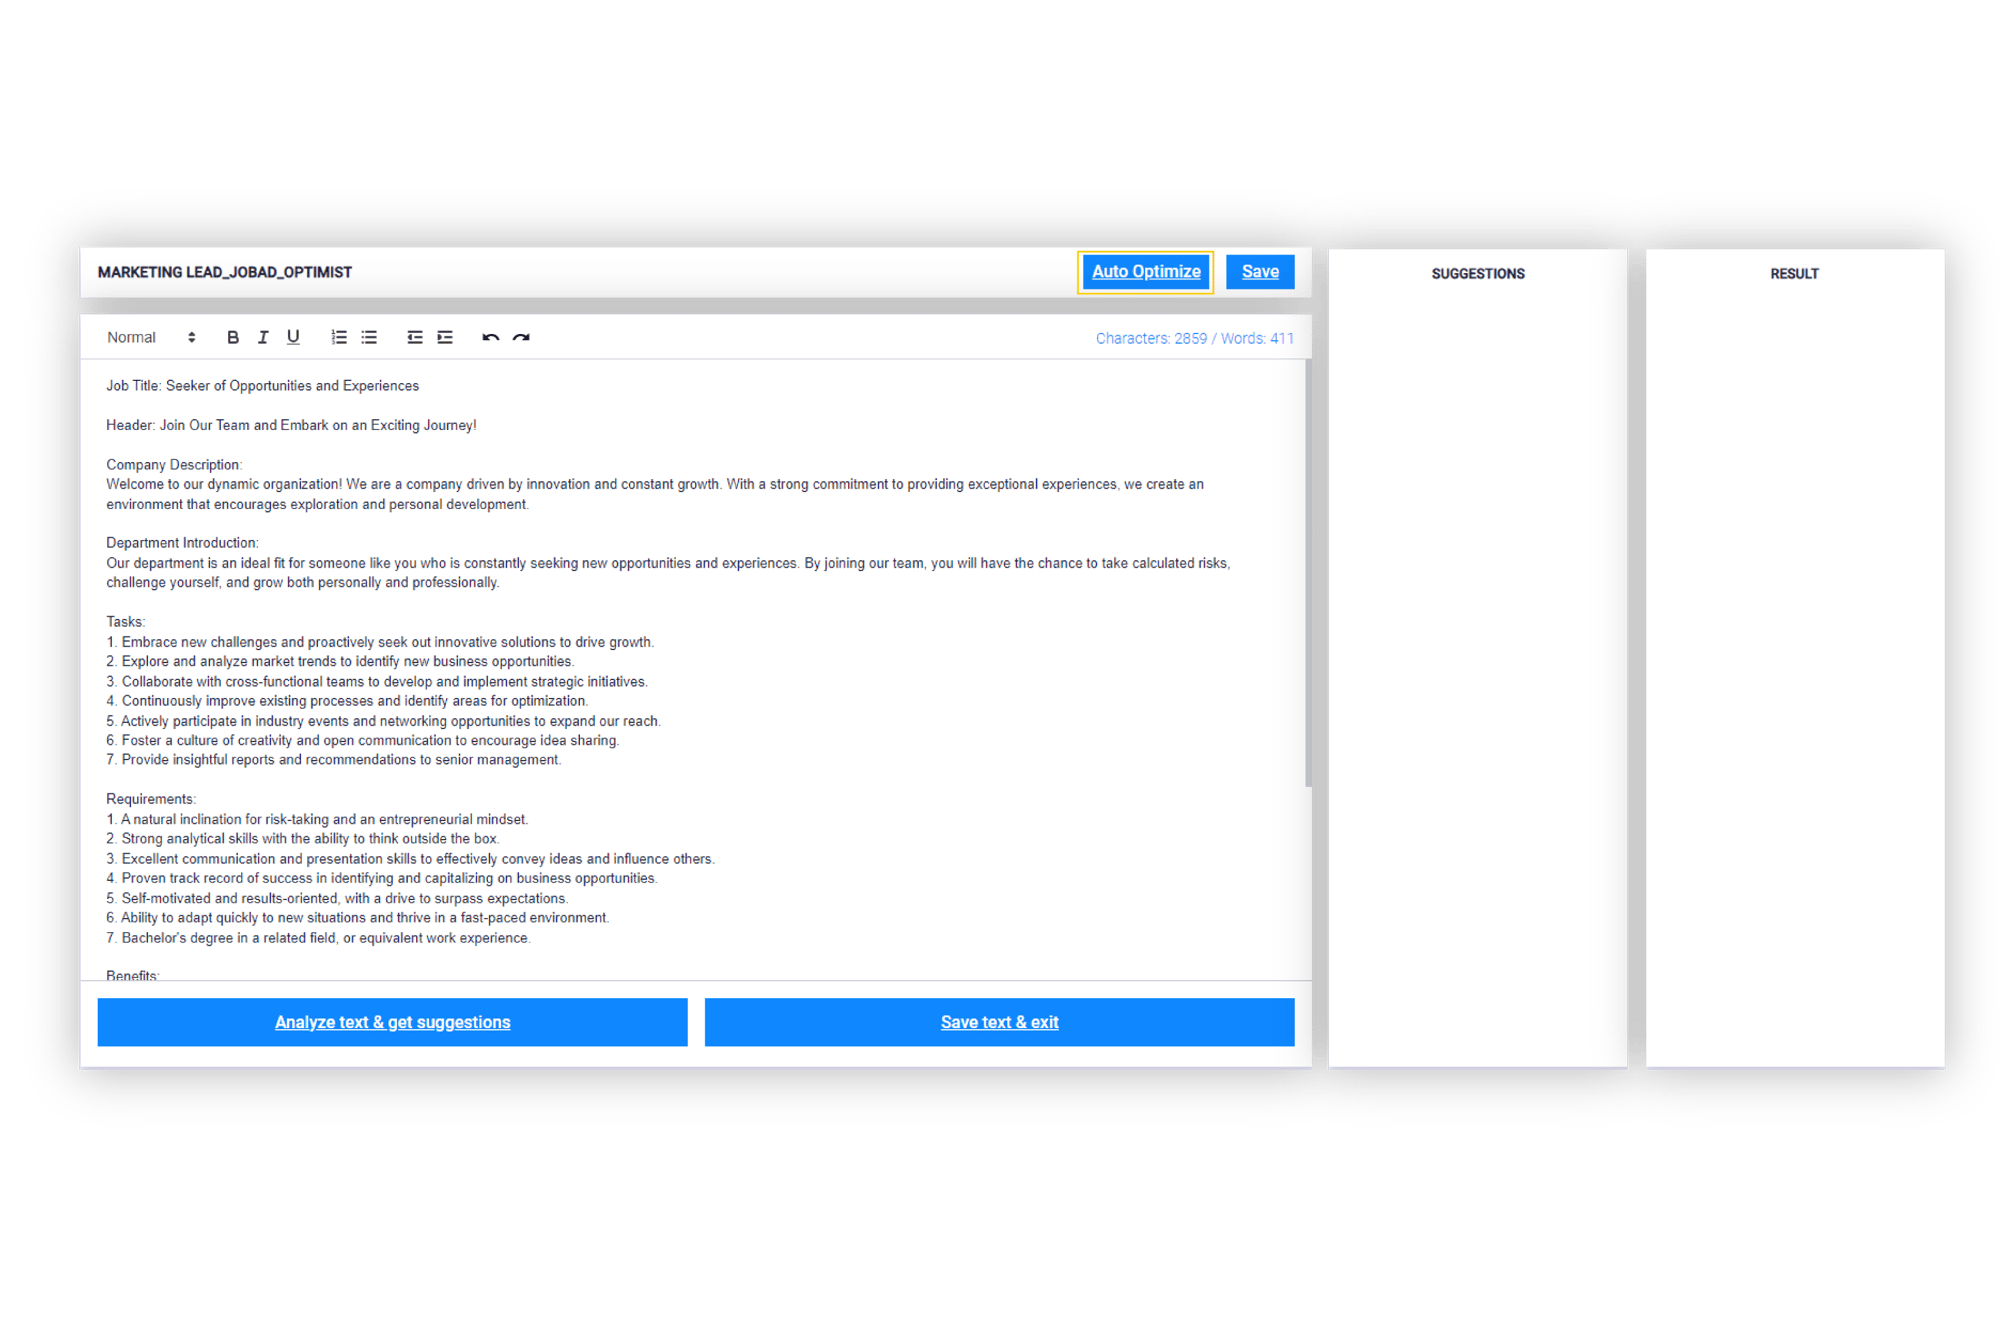 3.1. Optimiere Text